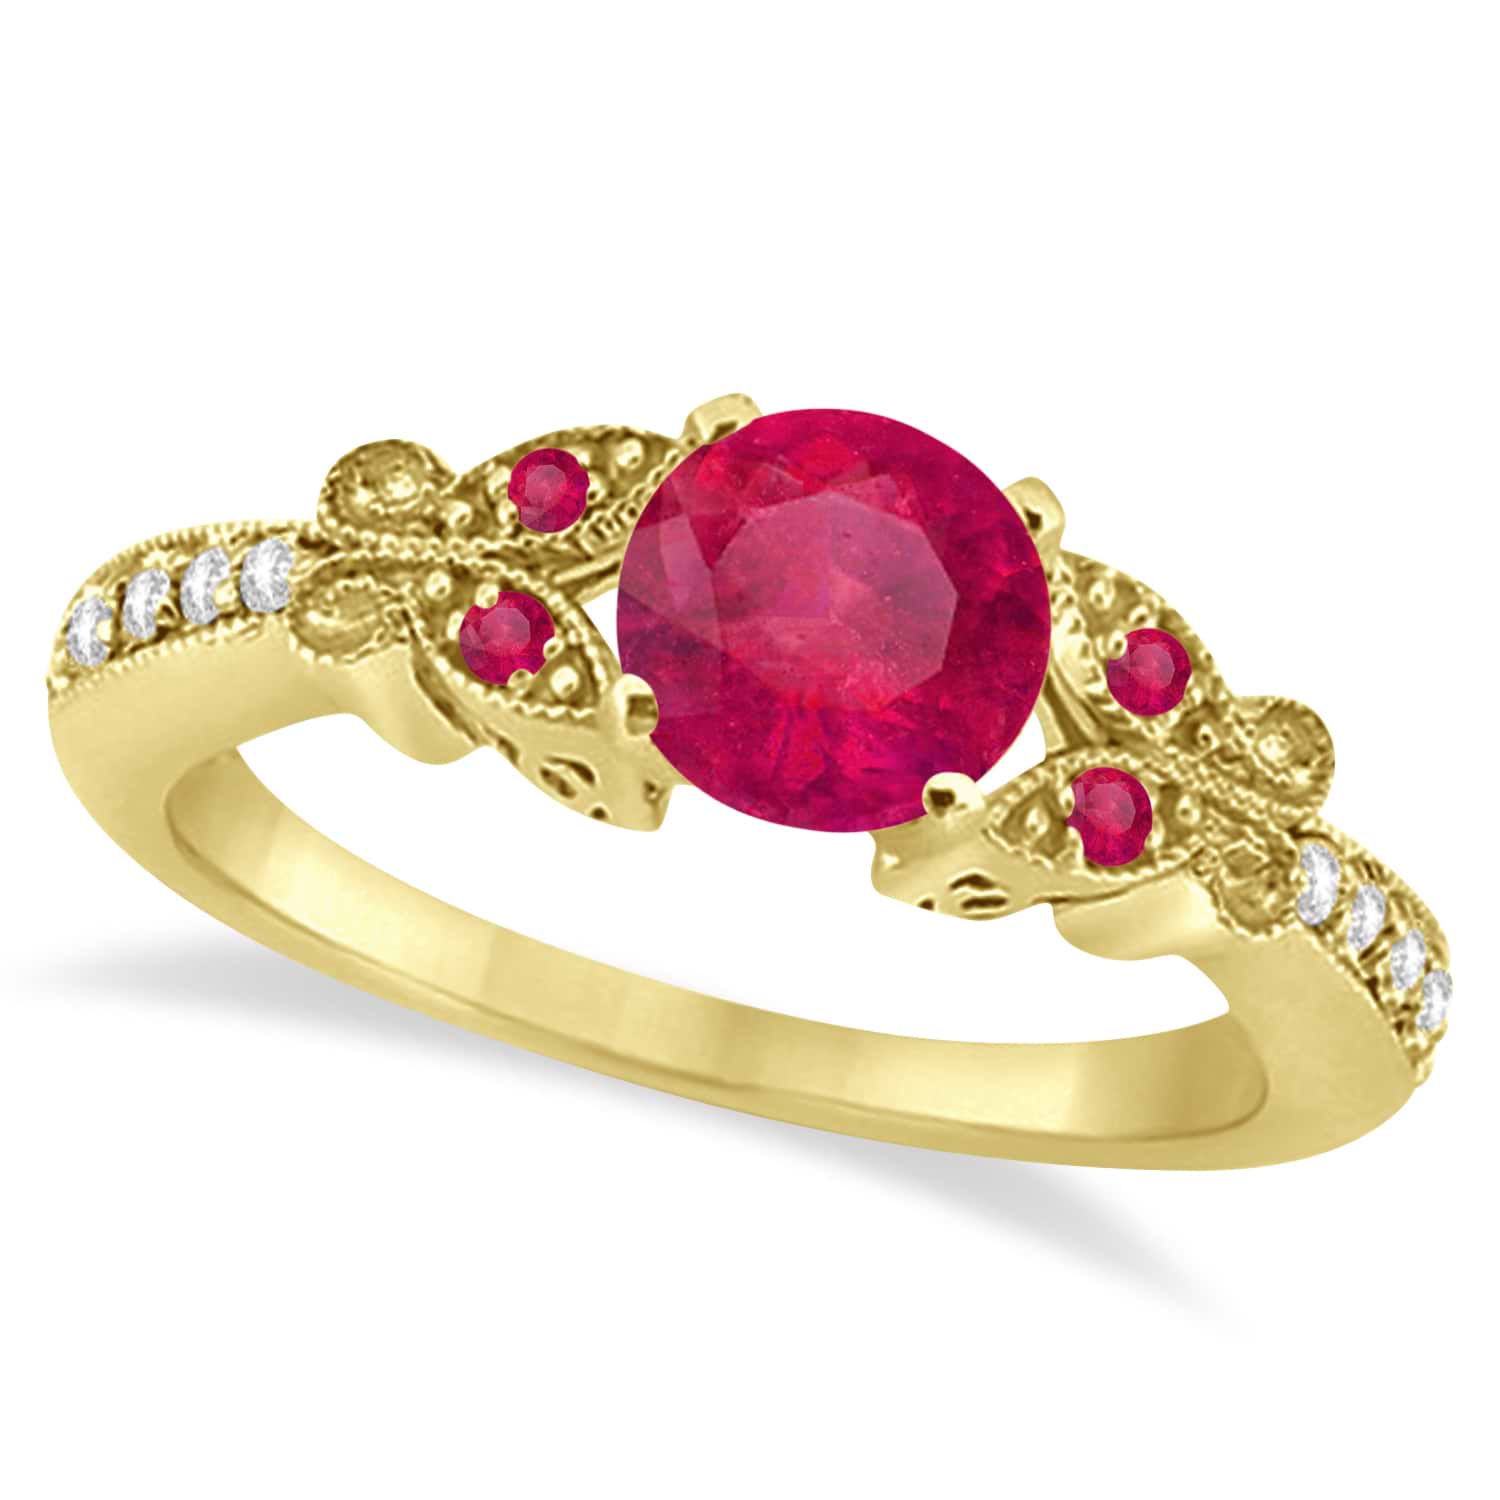 Butterfly Genuine Ruby & Diamond Engagement Ring 18K Yellow Gold 0.86ct